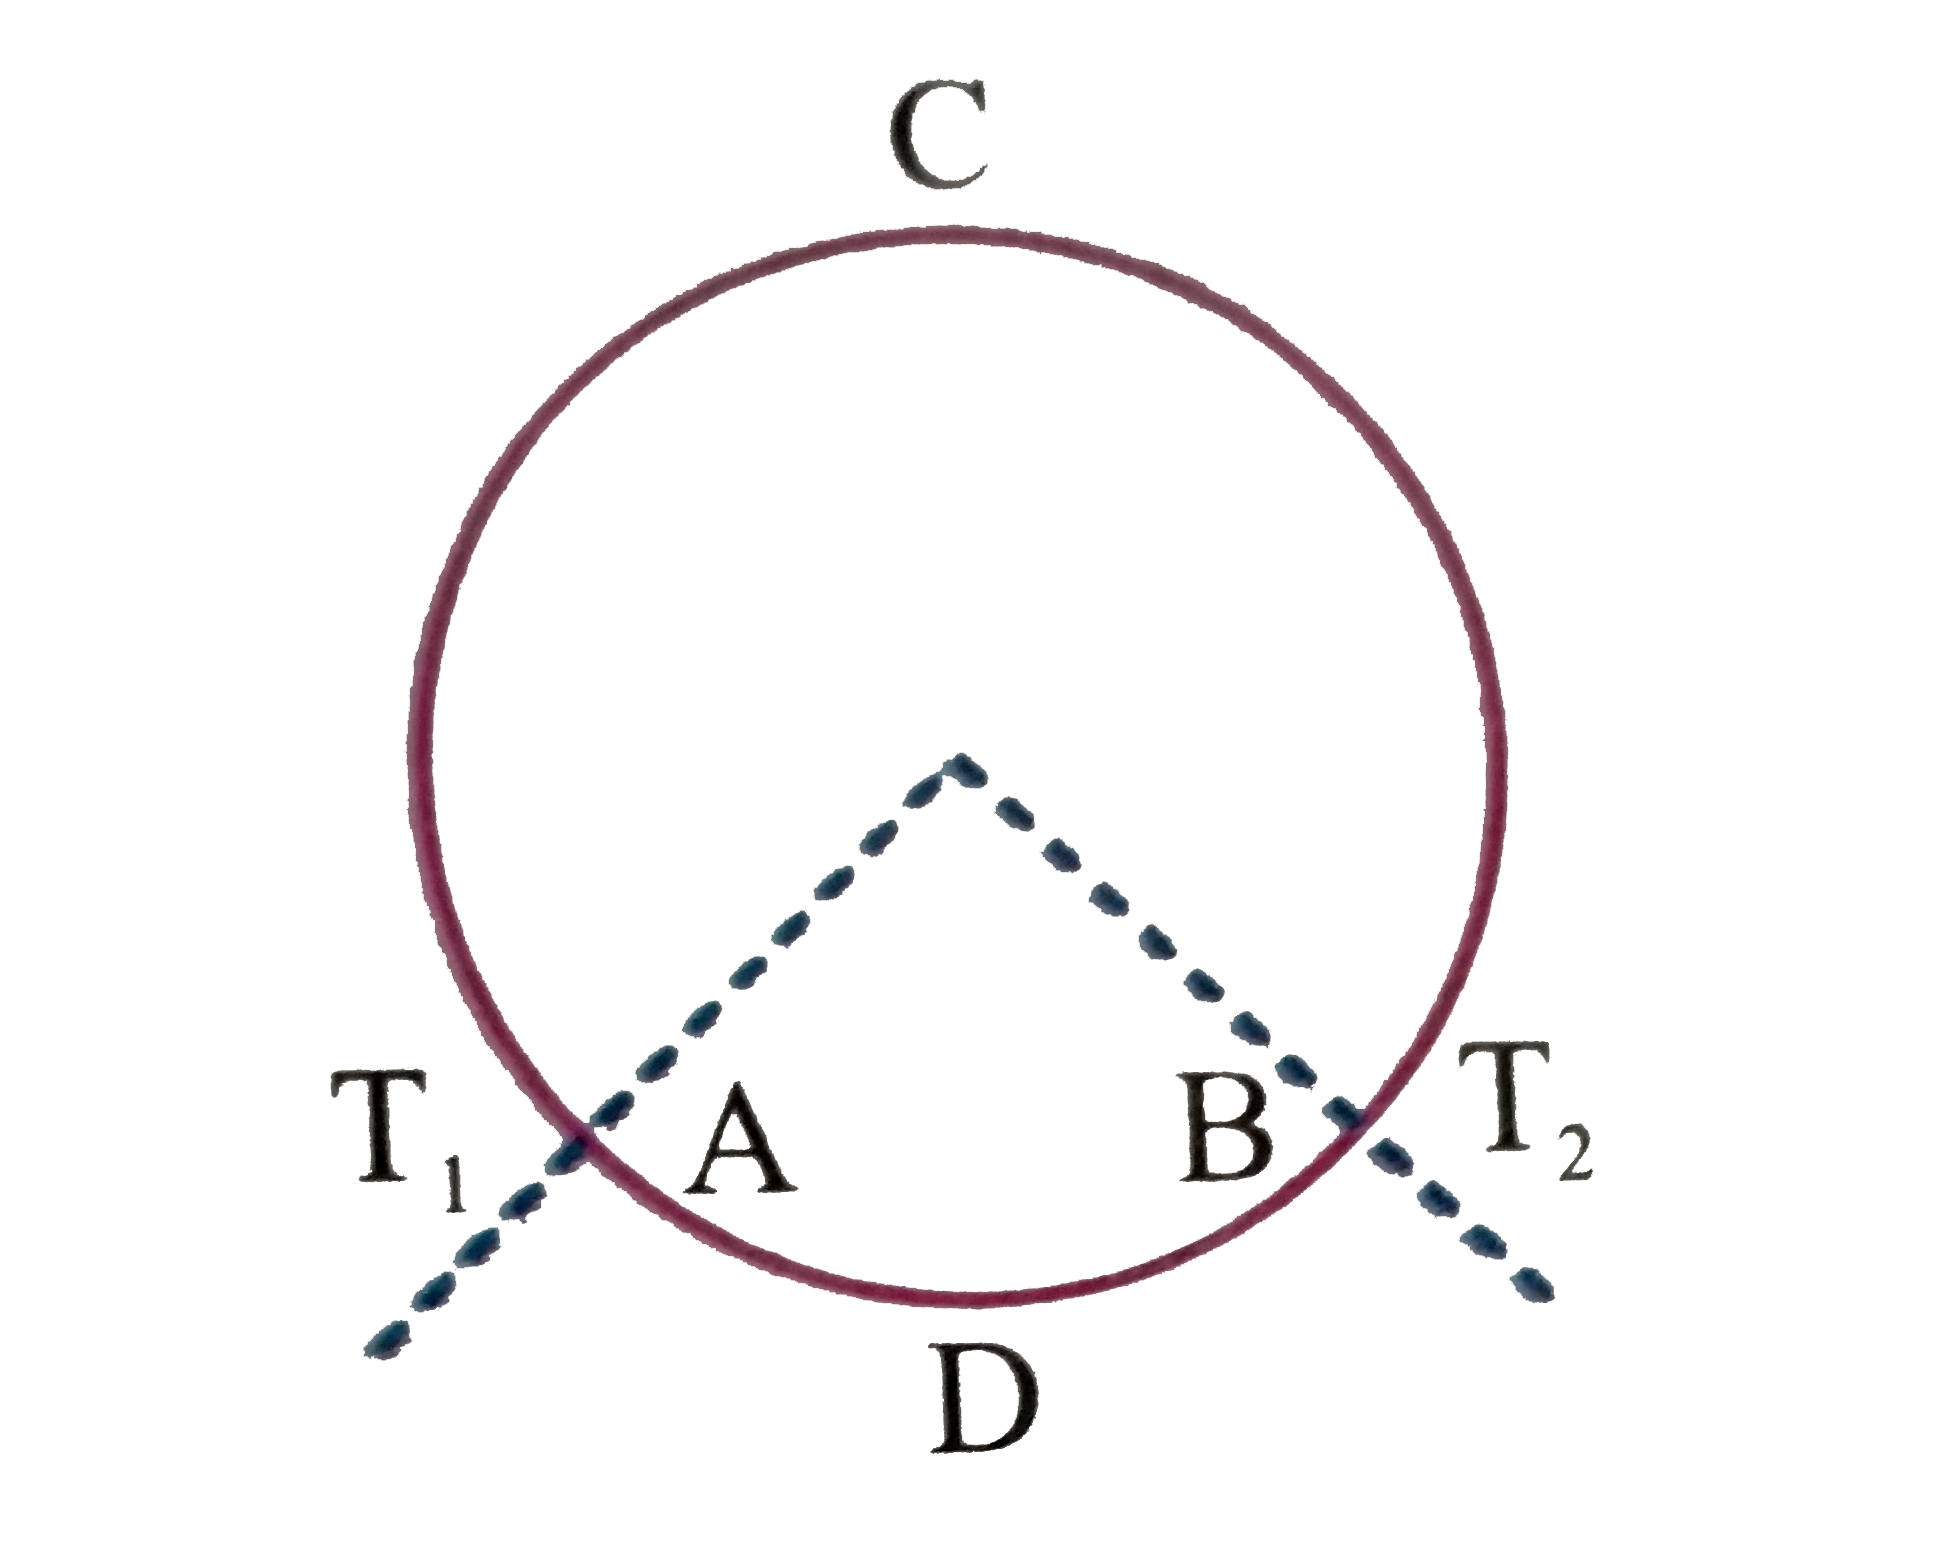 A ring consisting of two parts ADB and ACB of same conductivity k carries an amount of heat H The ADB part is now replaced with another metal keeping the temperature T1) and T(2) constant The heat carried increases to 2H What should be the conductivity of the new ADB Given (ACB)/(ADB)=3    .